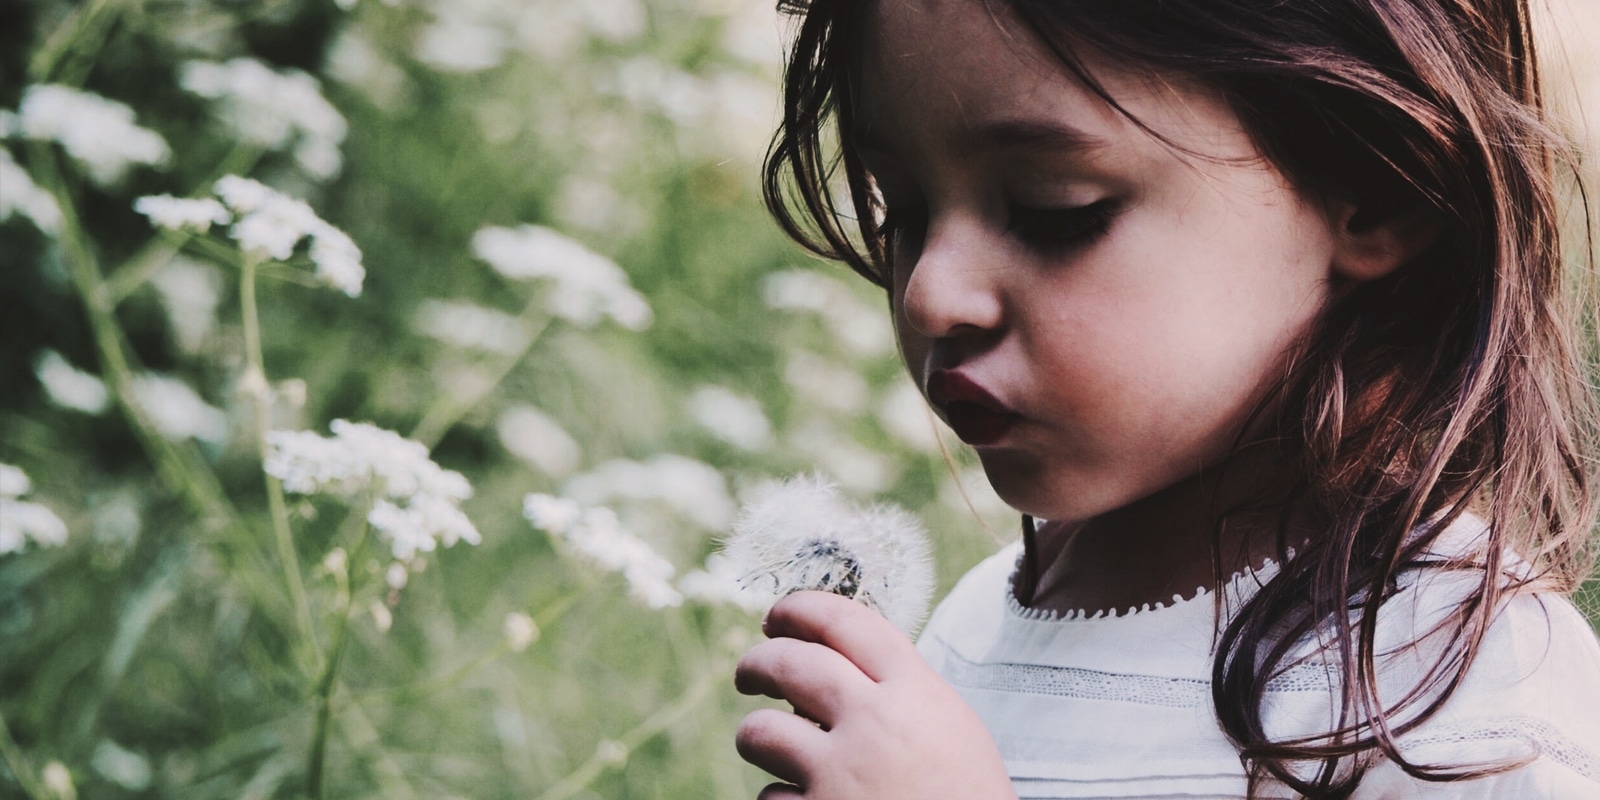 An image of a small girl blowing the dandelion flower